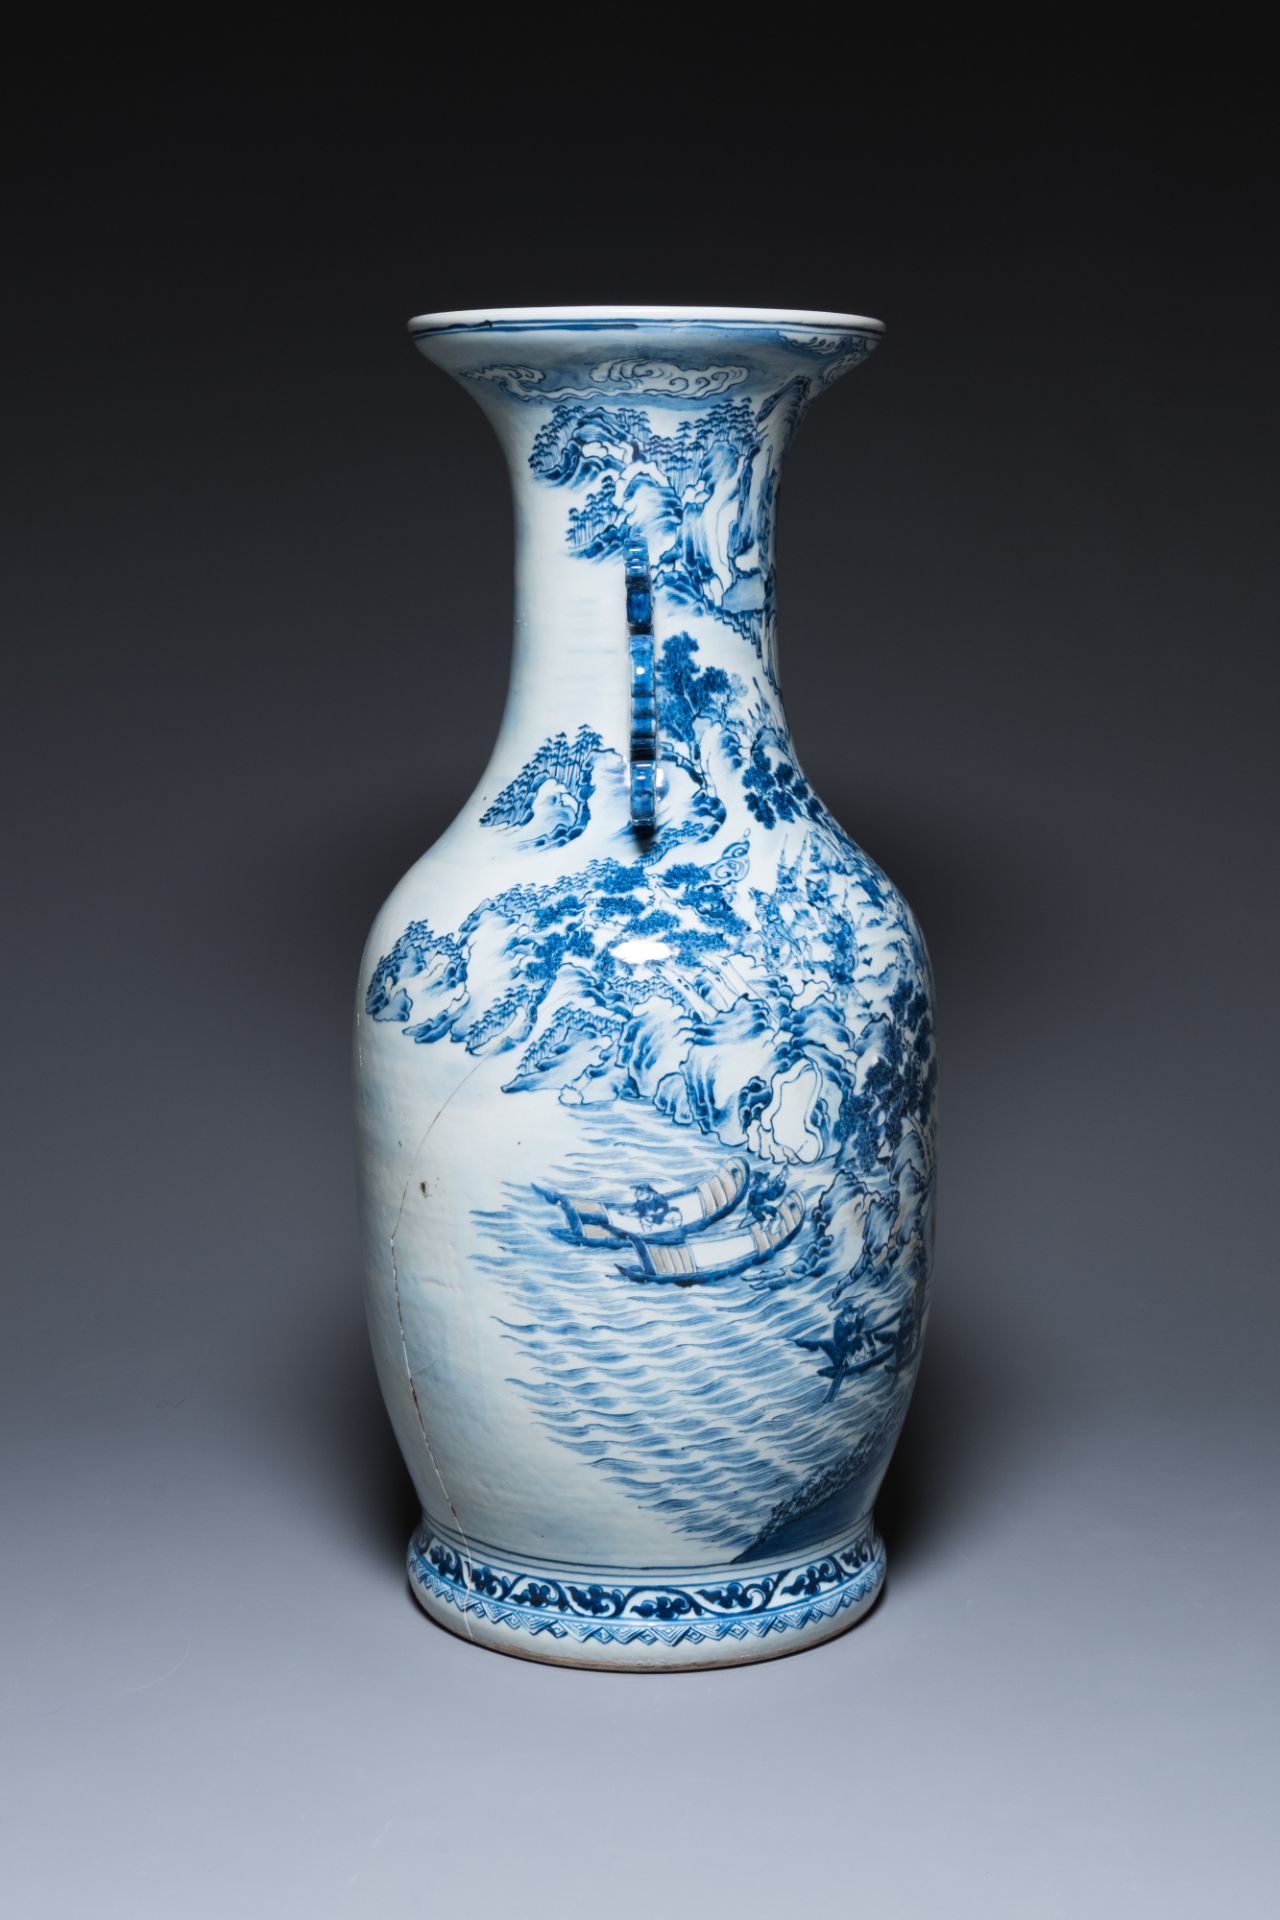 A large Chinese blue, white and copper-red vase with a mountainous river landscape, 19th C. - Image 2 of 6